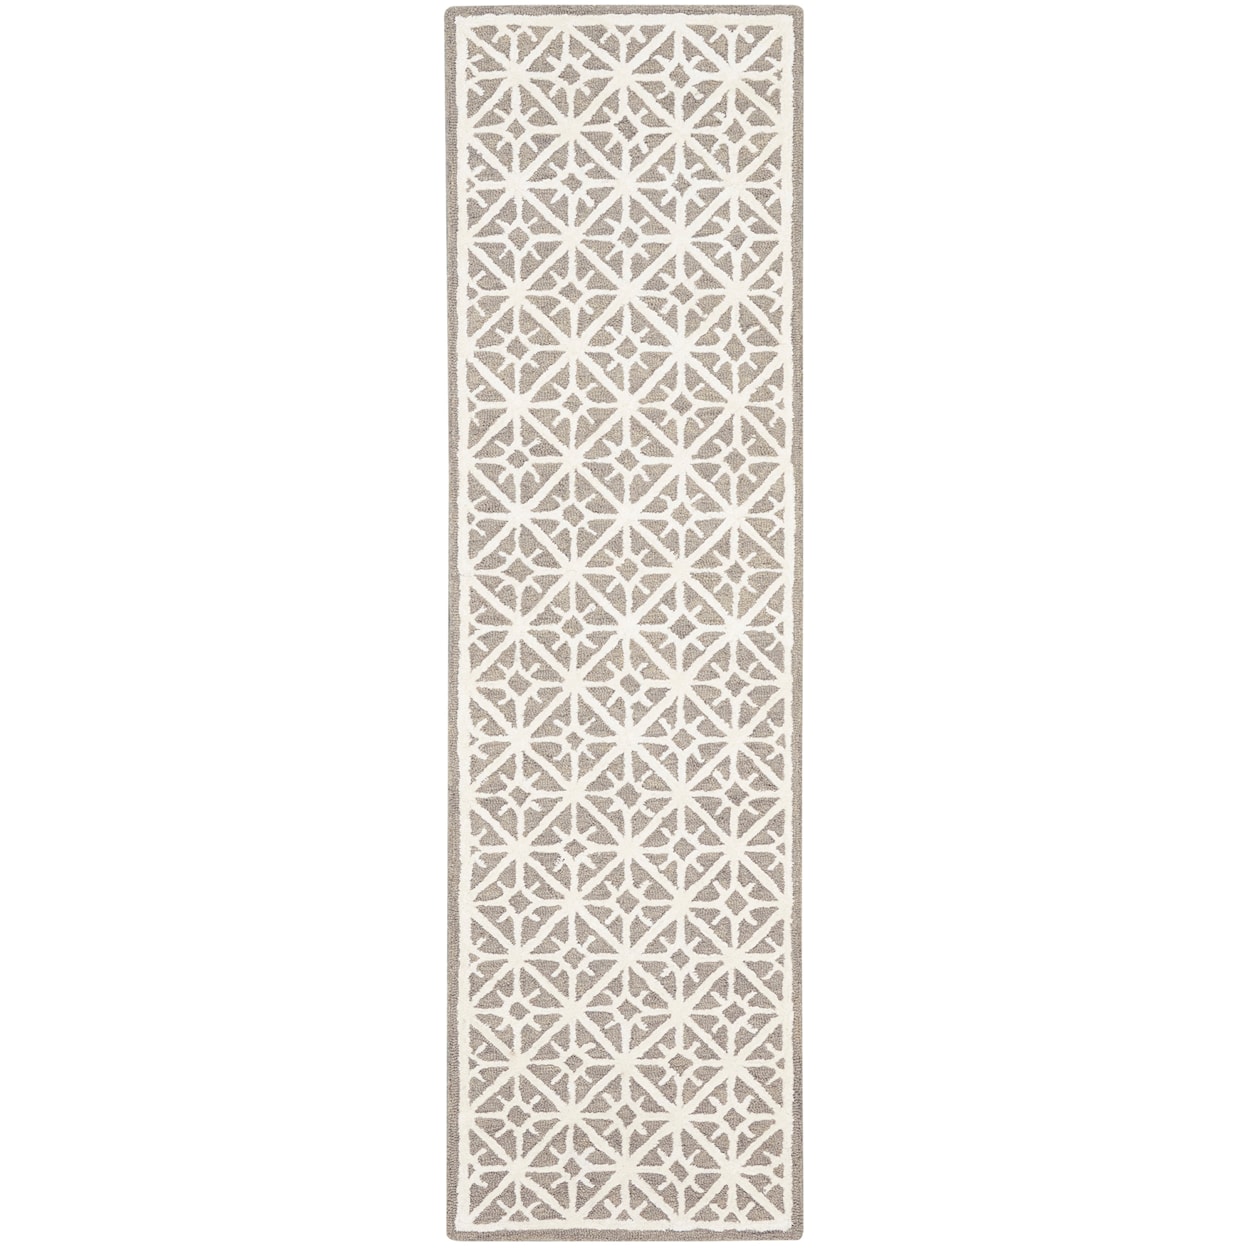 57 Grand By Nicole Curtis Series 2 2'3" x 8'  Rug